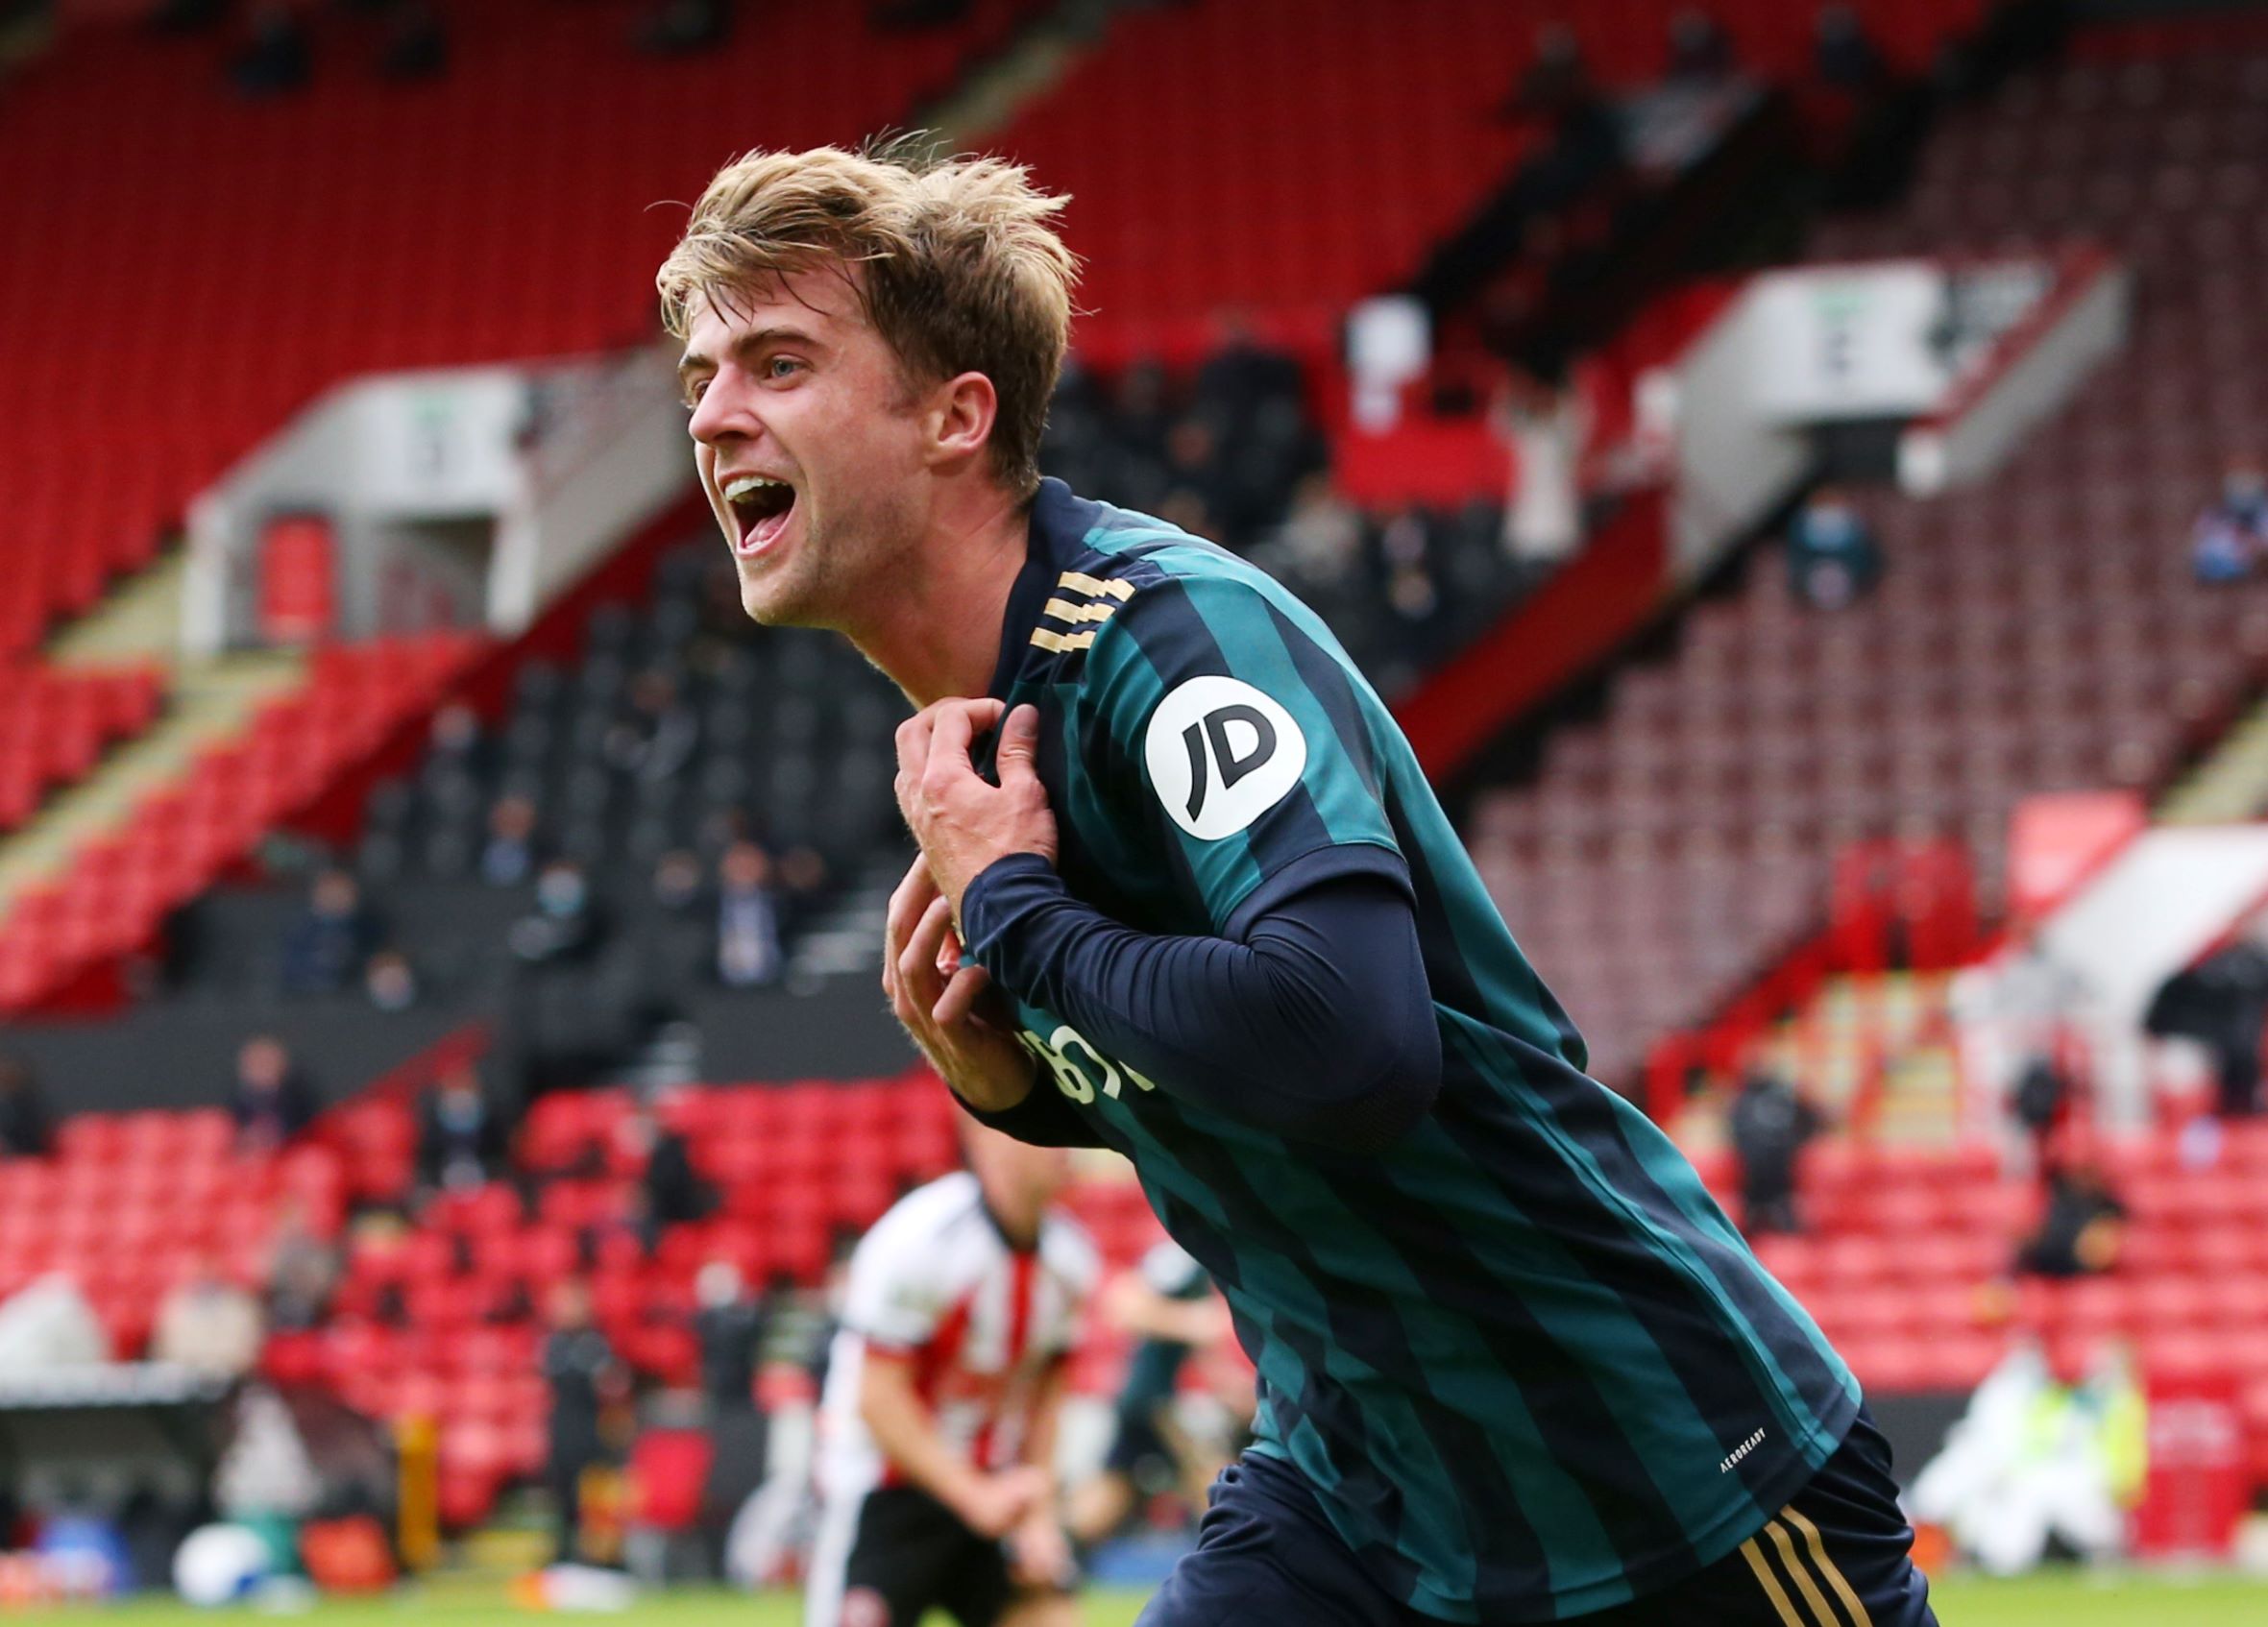 Bamford bags again as Sheffield United remain without a goal ahead of tough fixture run